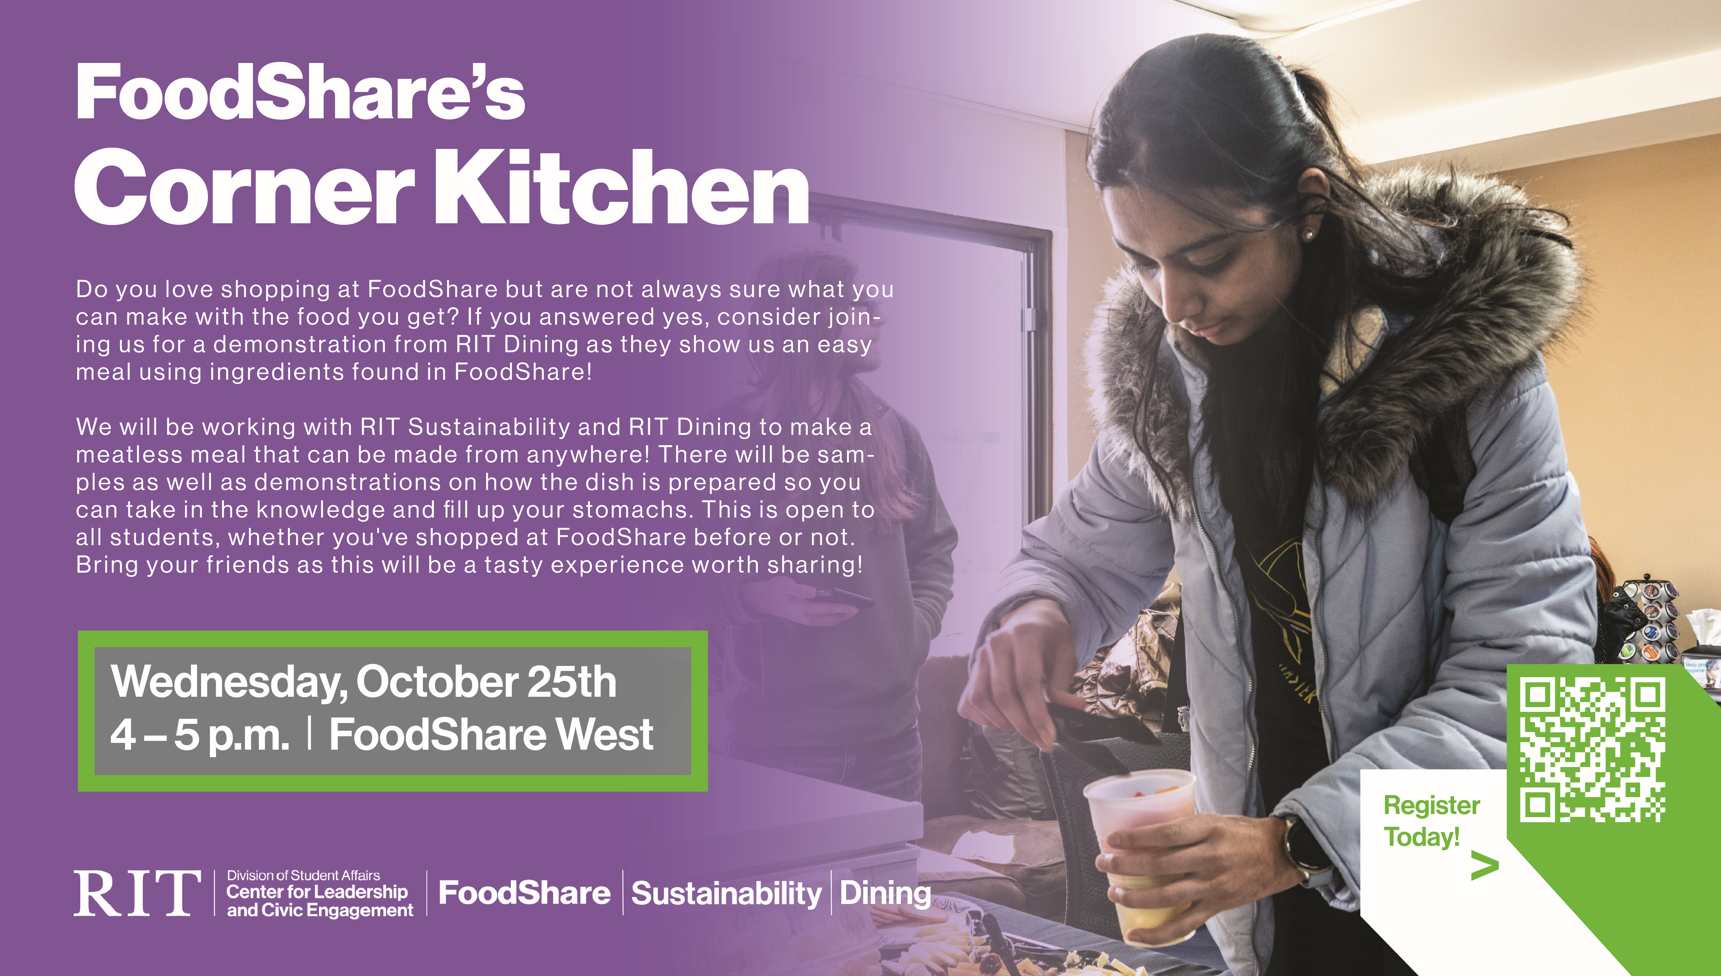 Event graphic for FoodShare's Corner Kitchen